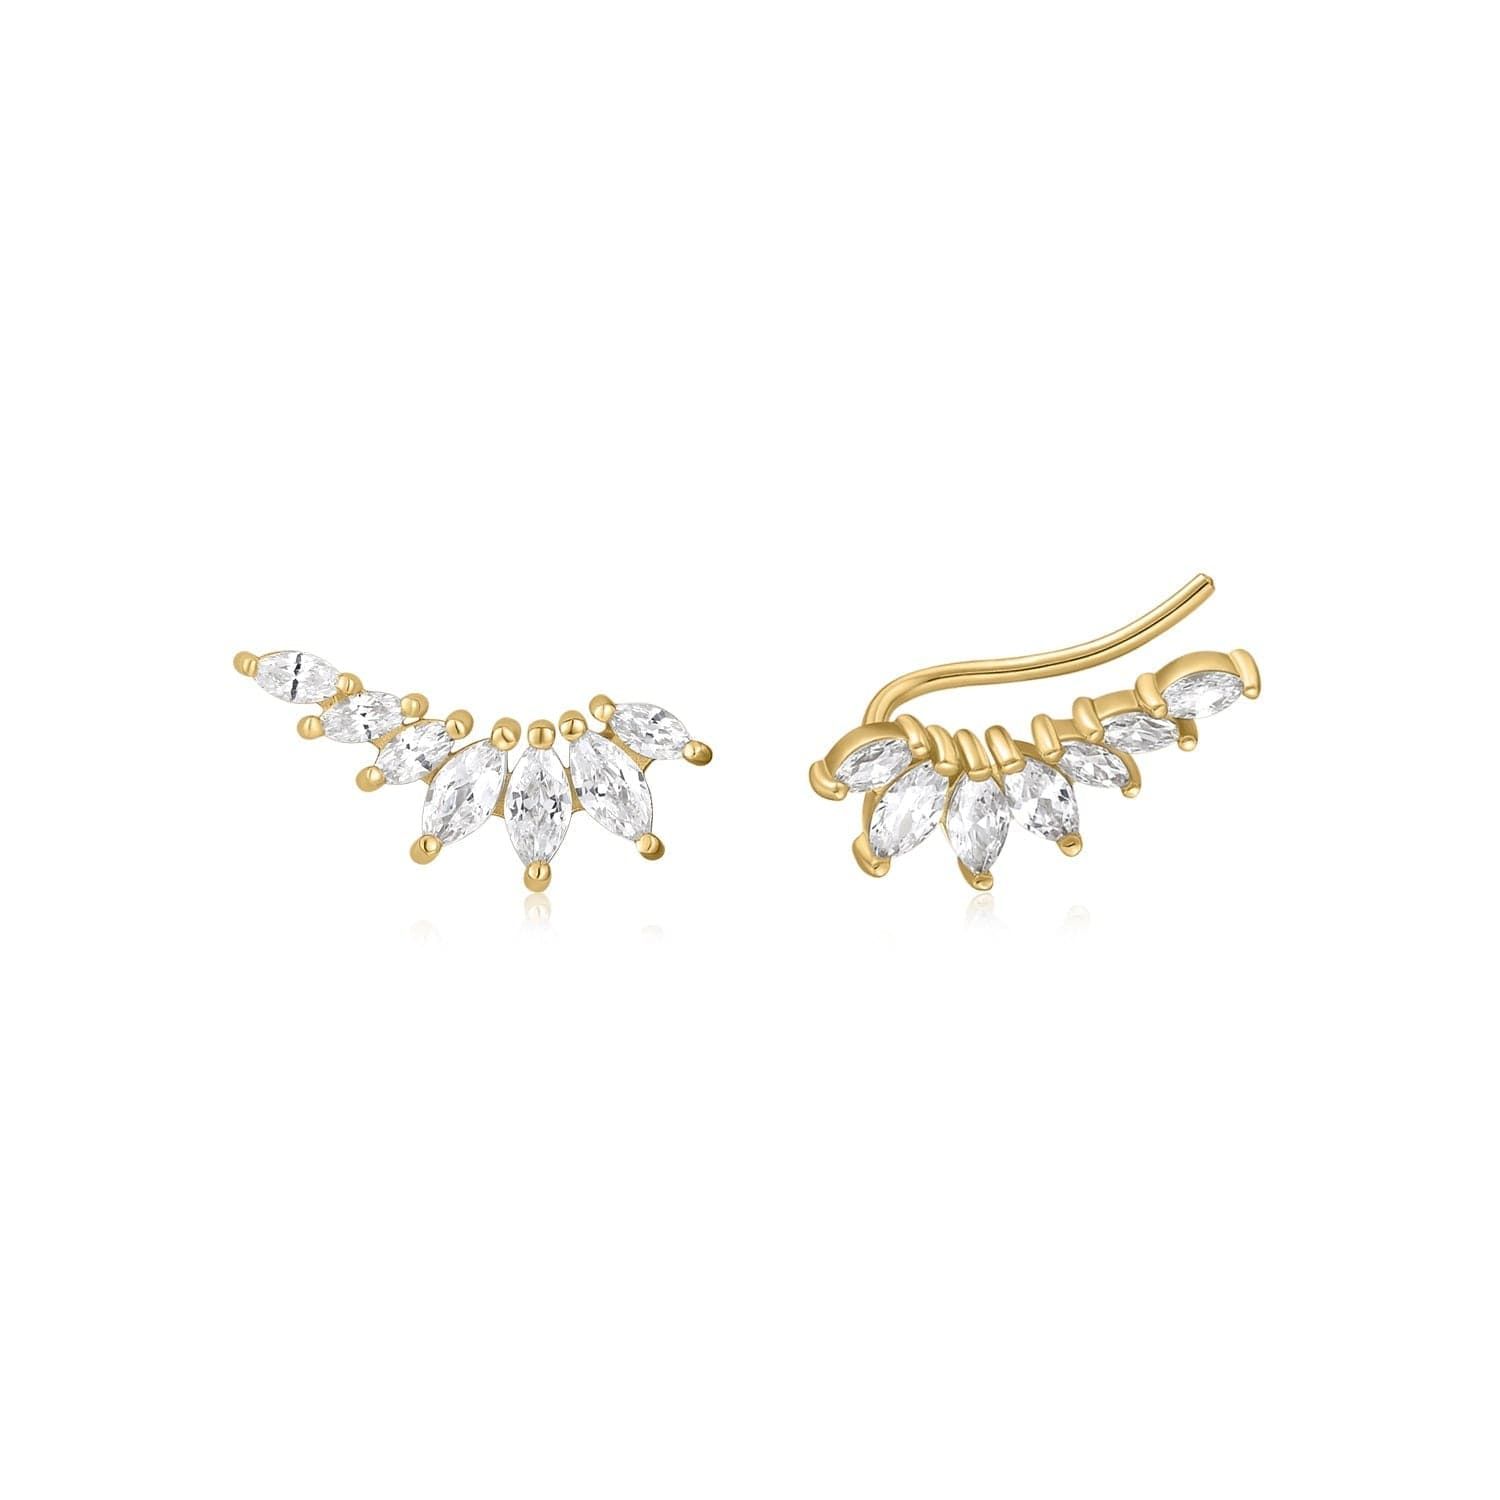 a pair of gold earrings with crystal drops